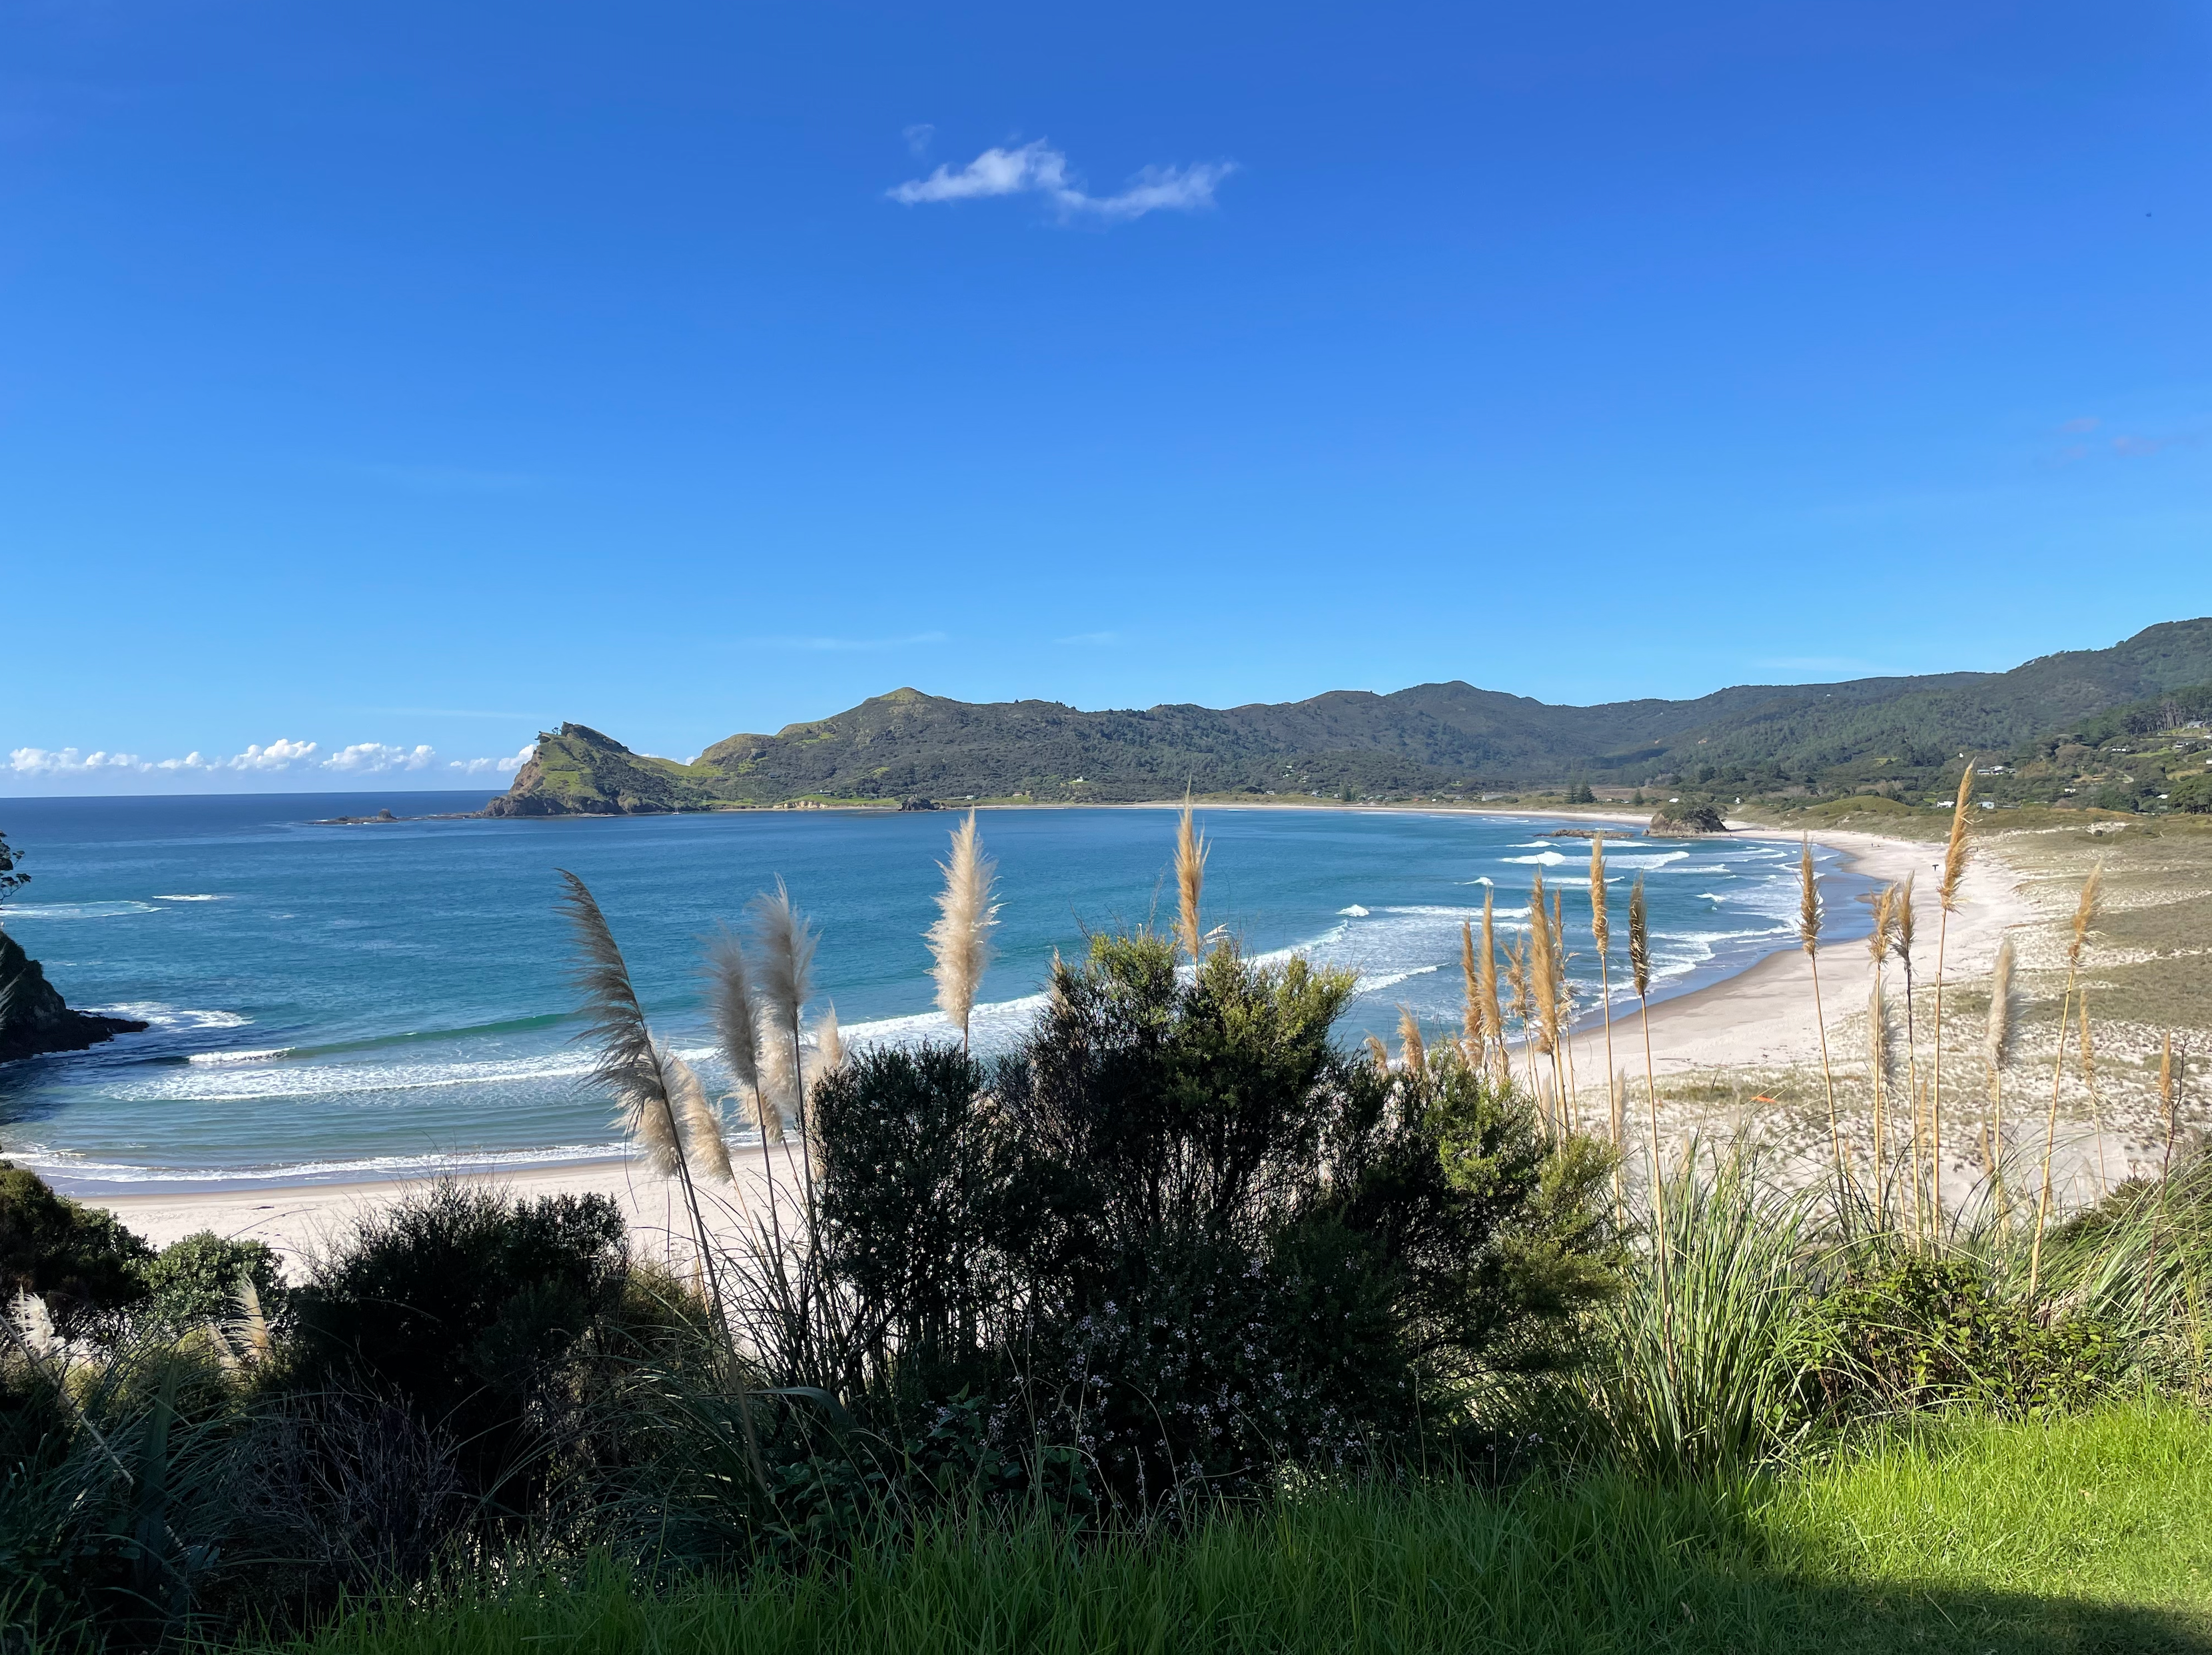 Picture of Medlands Beach on Great Barrier Island.